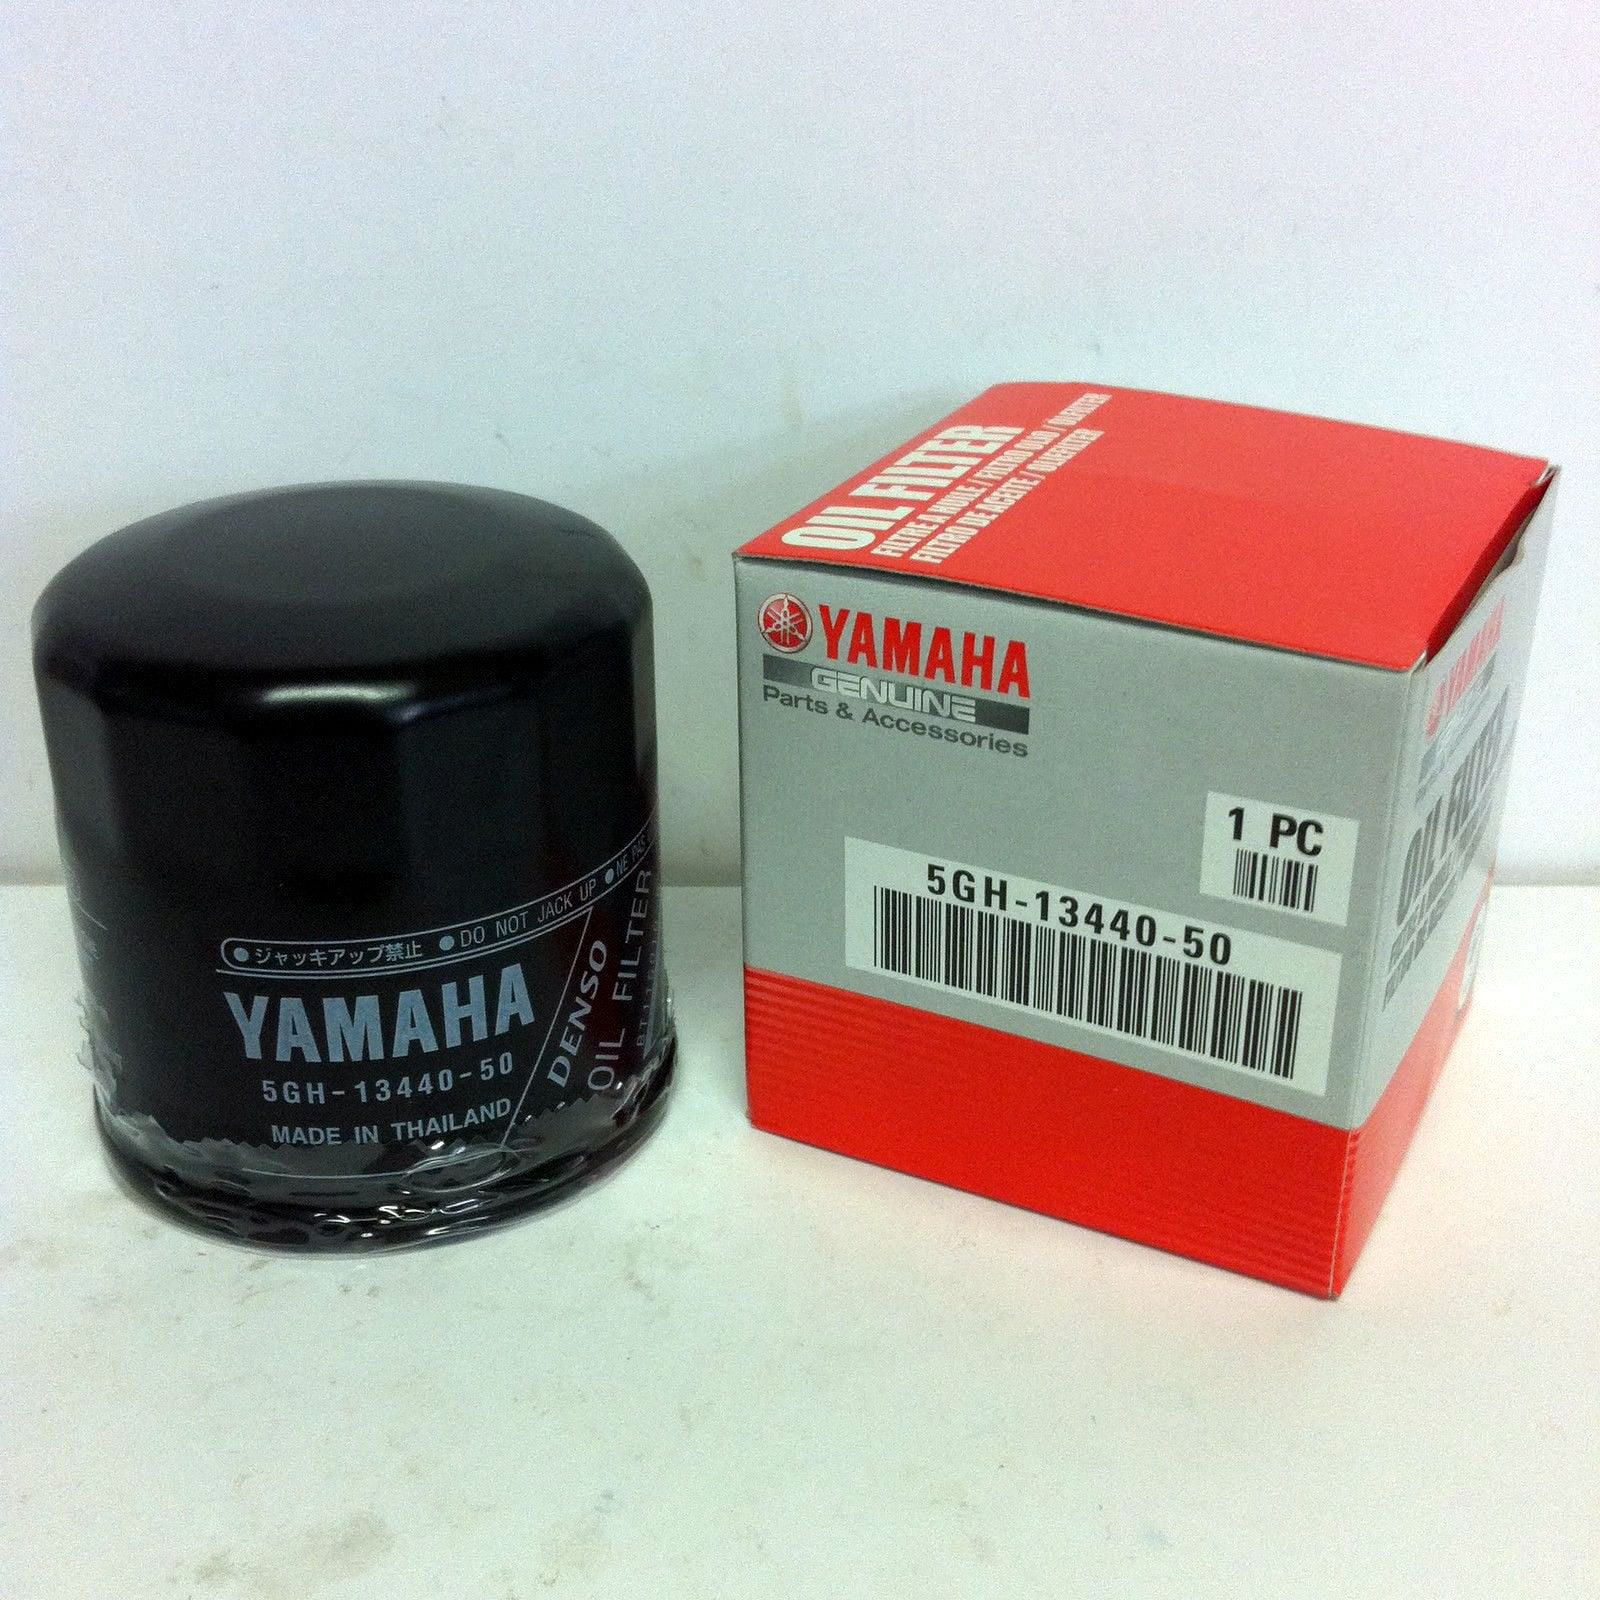 OEM Yamaha Oil Filter Element for Outboards PWC and Motorcycles 5GH-13440-50-00 